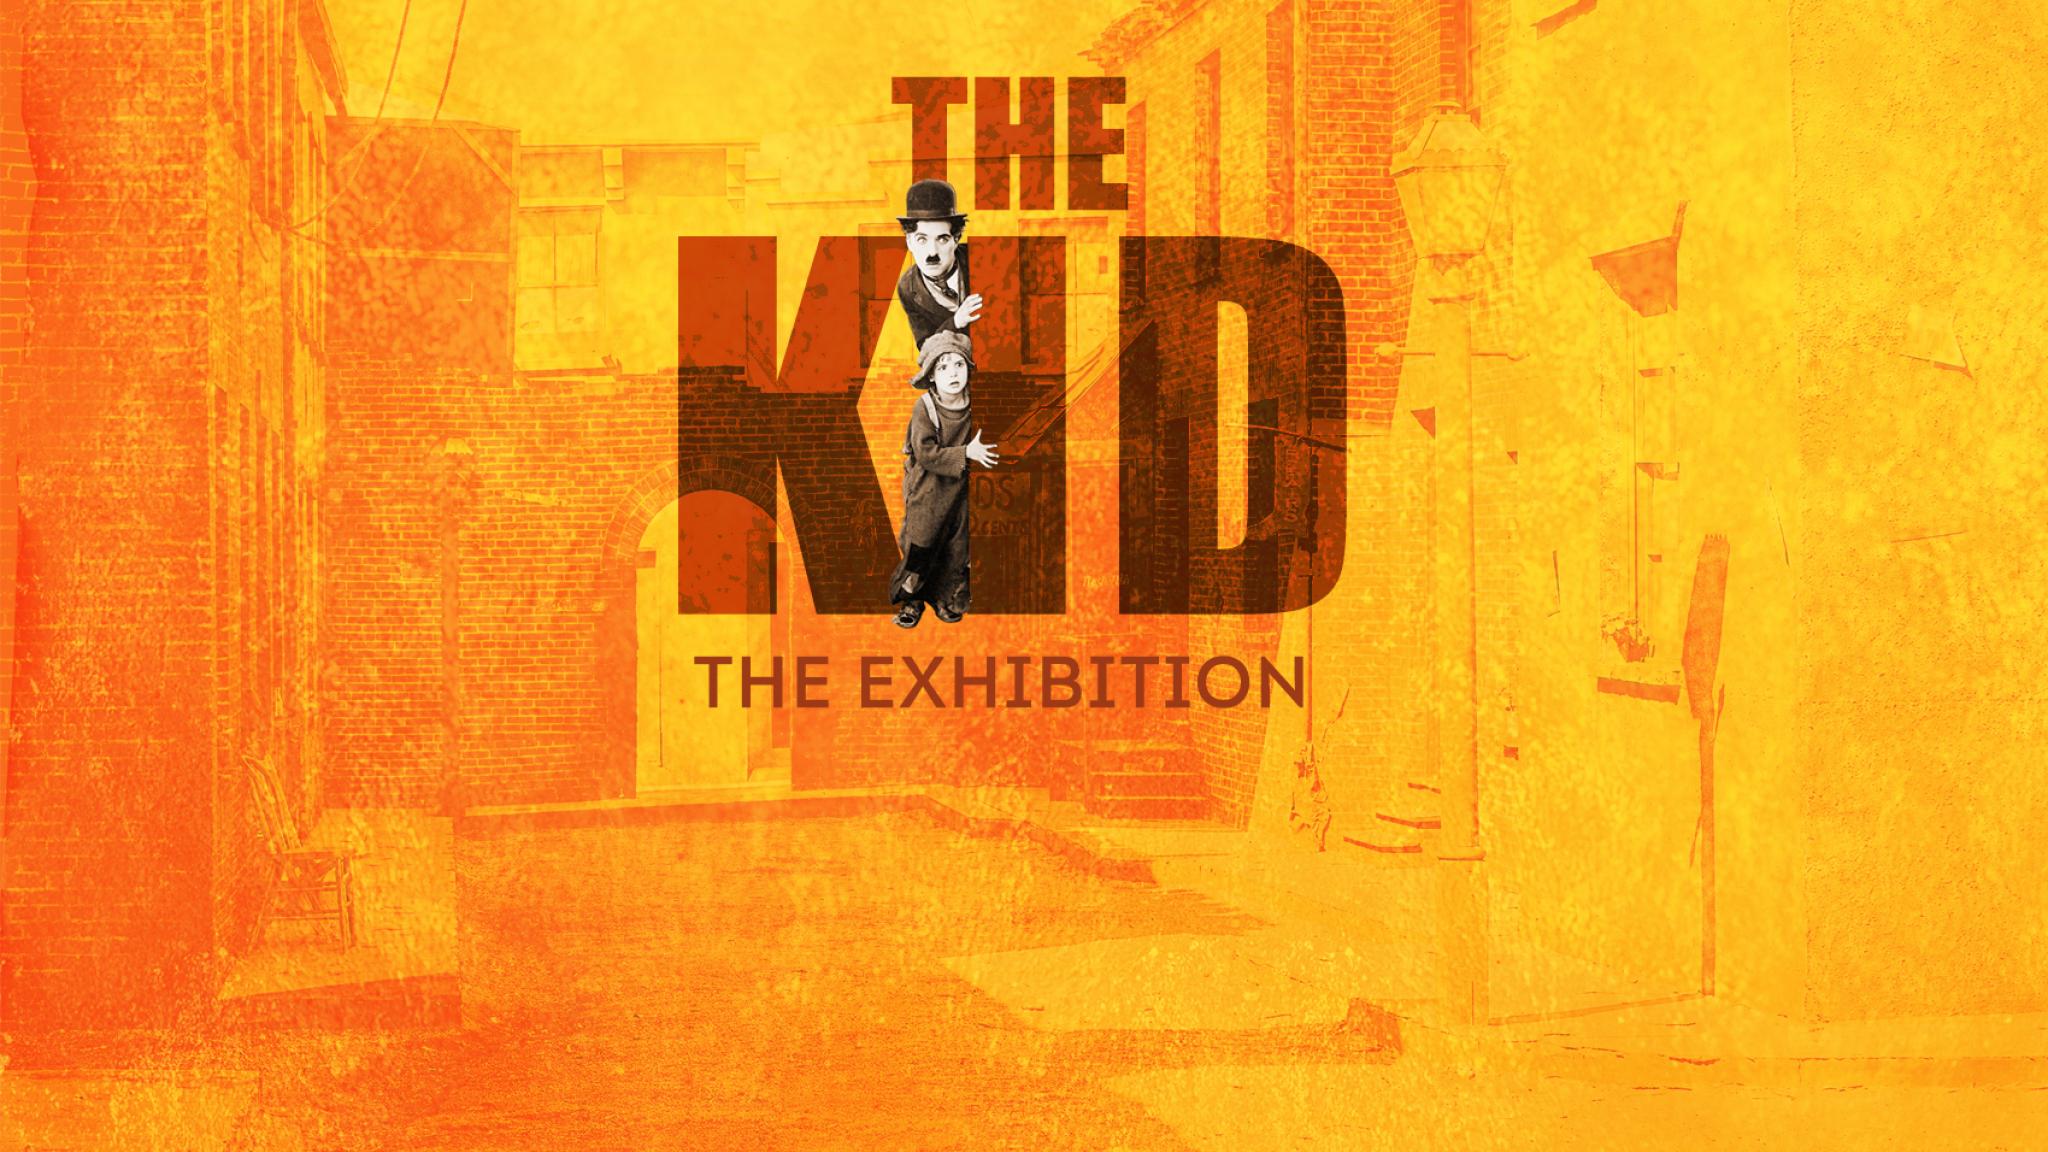 Charlie Chaplin - The Kid: The Exhibition at Chaplin's World in Vevey. things to do in Lausanne or Montreux